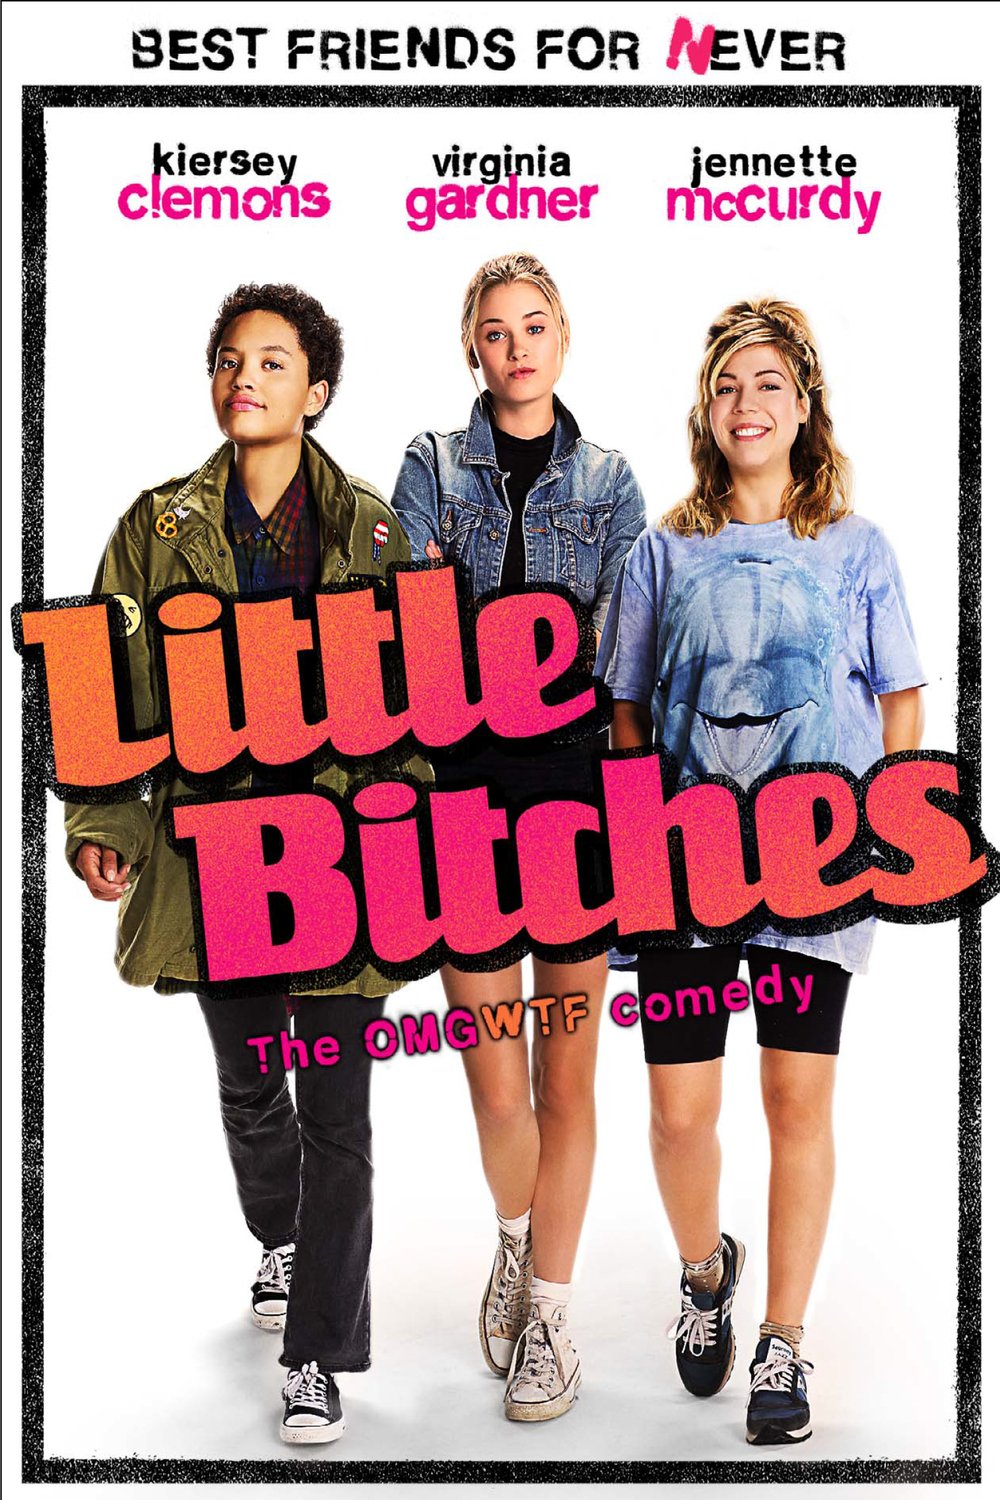 Poster of the movie Little Bitches